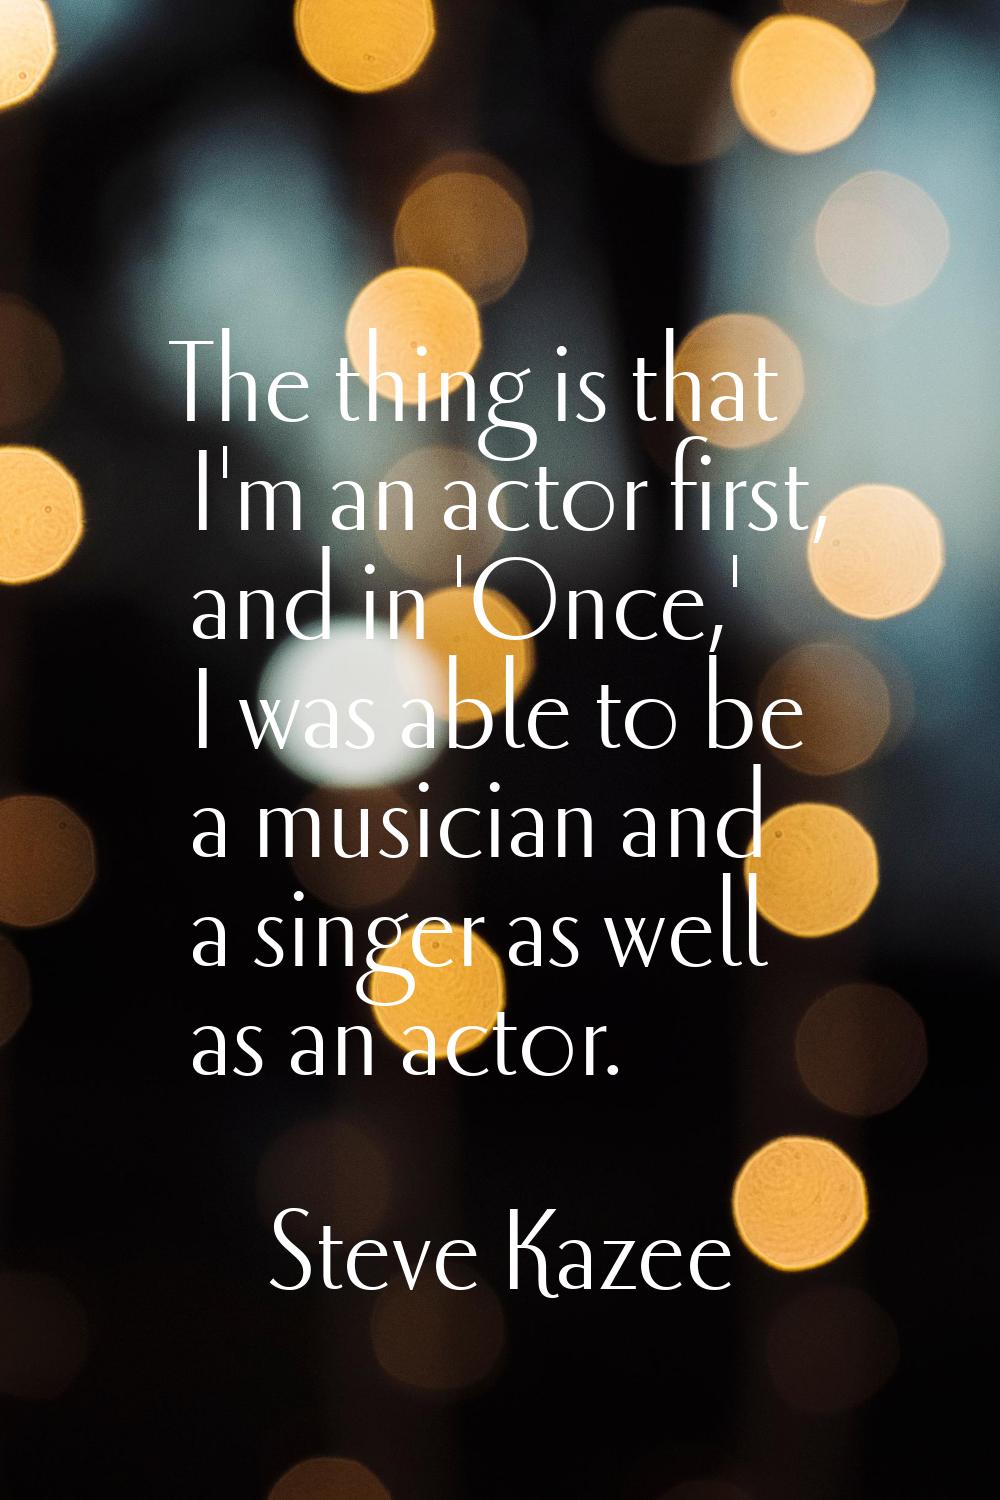 The thing is that I'm an actor first, and in 'Once,' I was able to be a musician and a singer as we